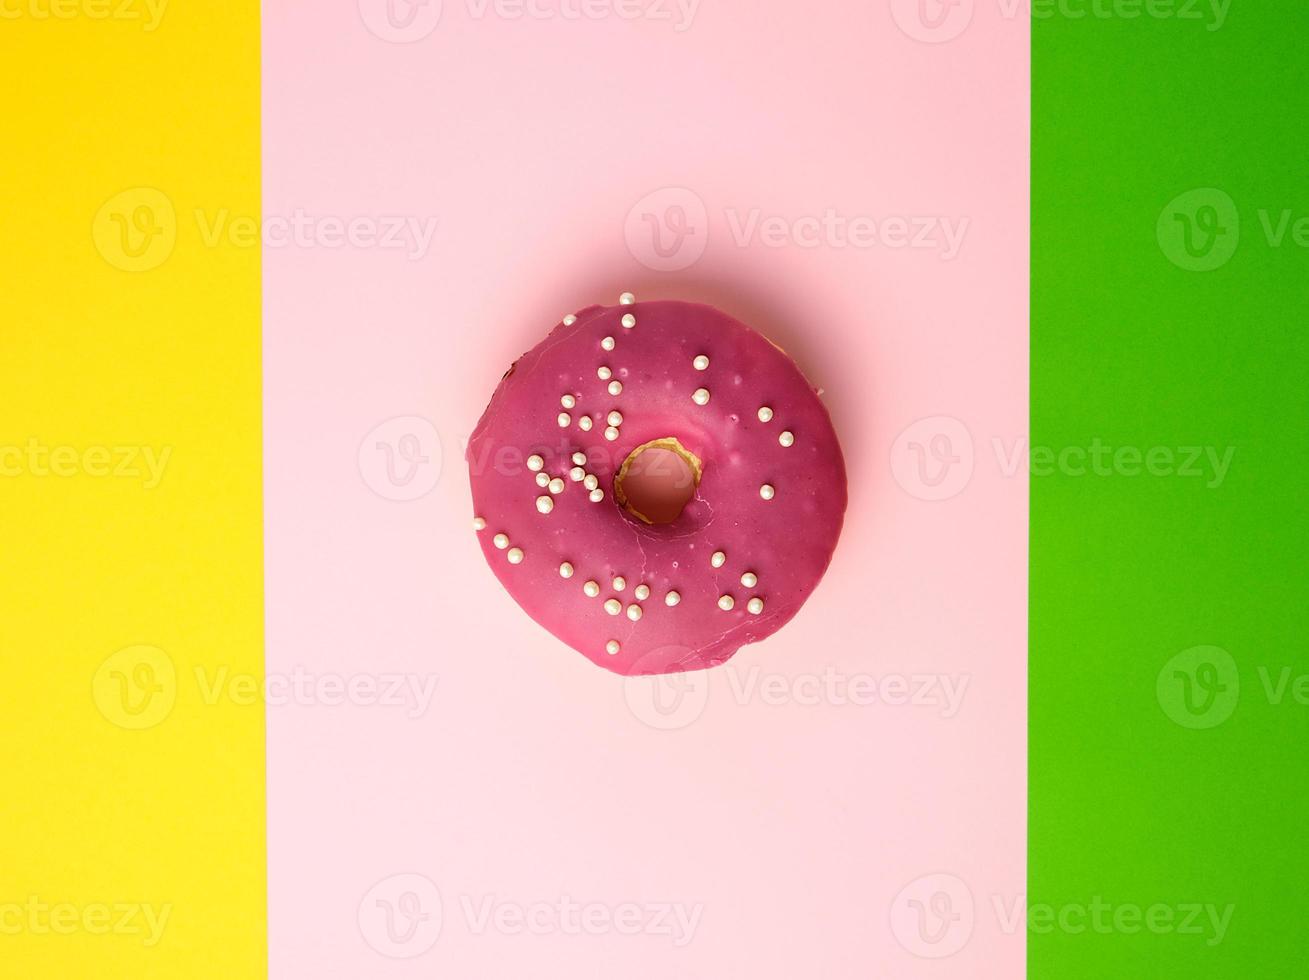 whole round red donut with sprinkles lie on a color background photo